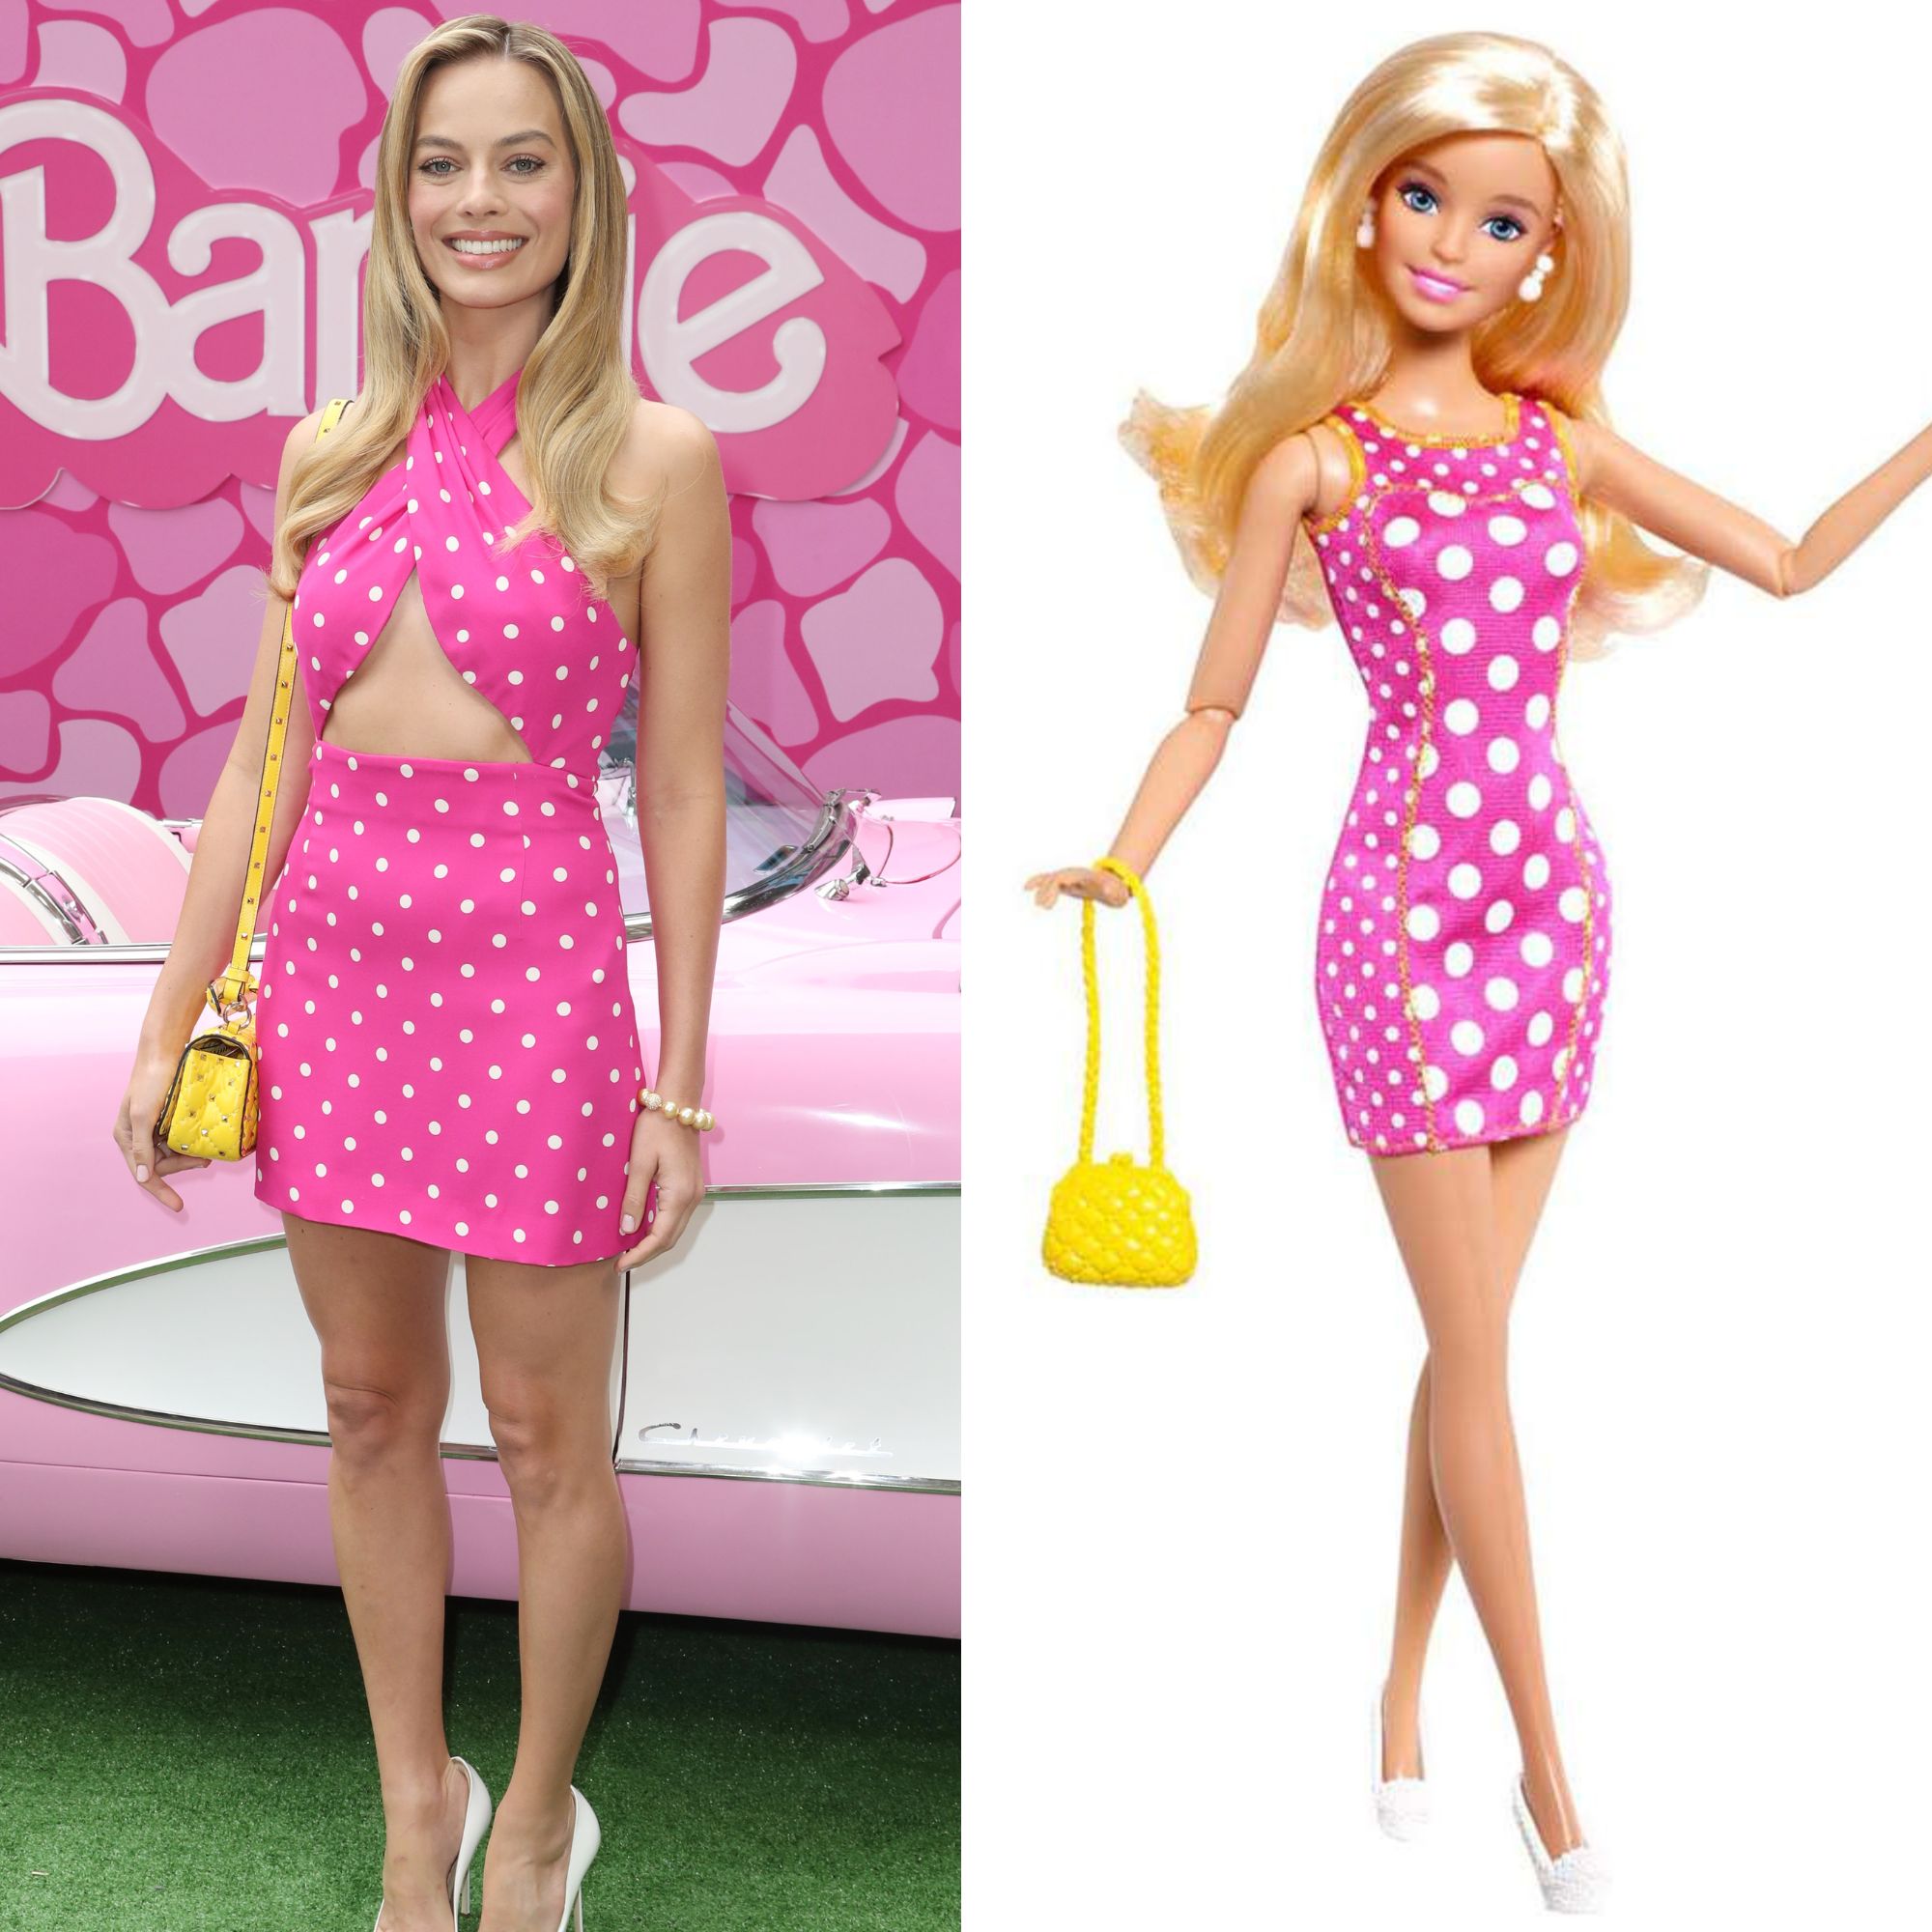 Margot Robbie's Iconic Barbie Looks: See All The Doll Styles